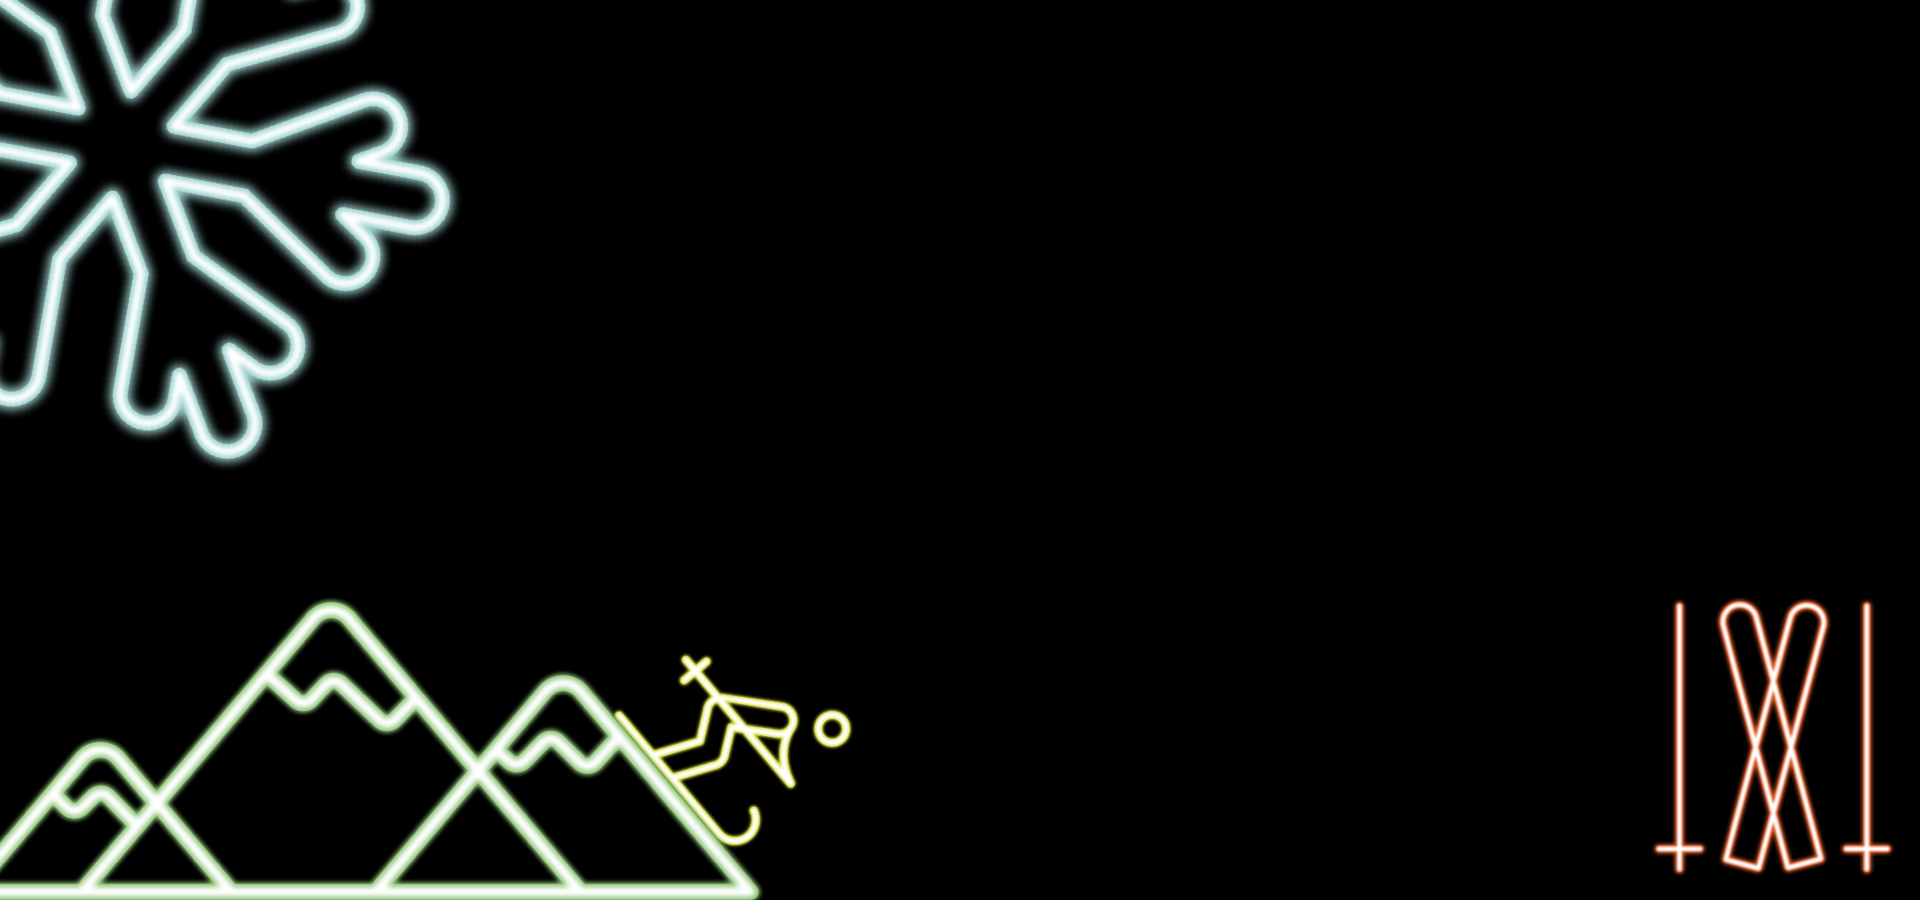 Black neon image with snowflakes, mountains, and skis.